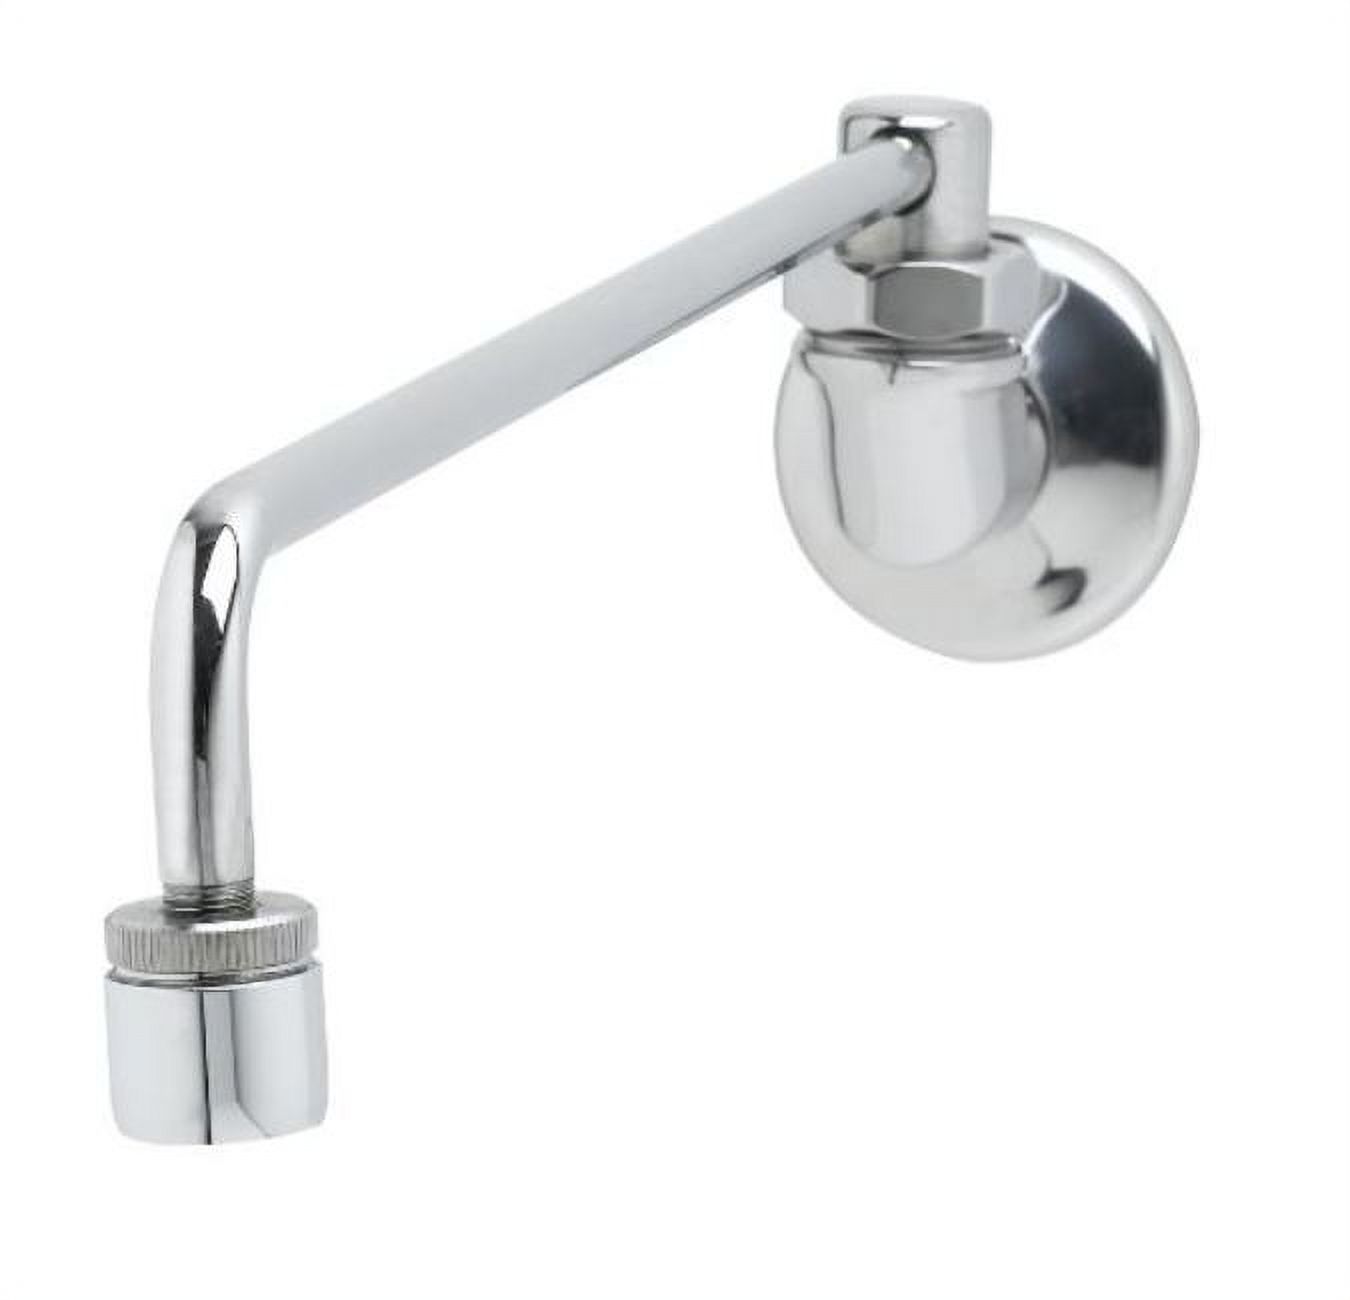 T And S Brass B-0577 2.2 GPM Wall Mounted Utility Faucet - Chrome - image 1 of 1